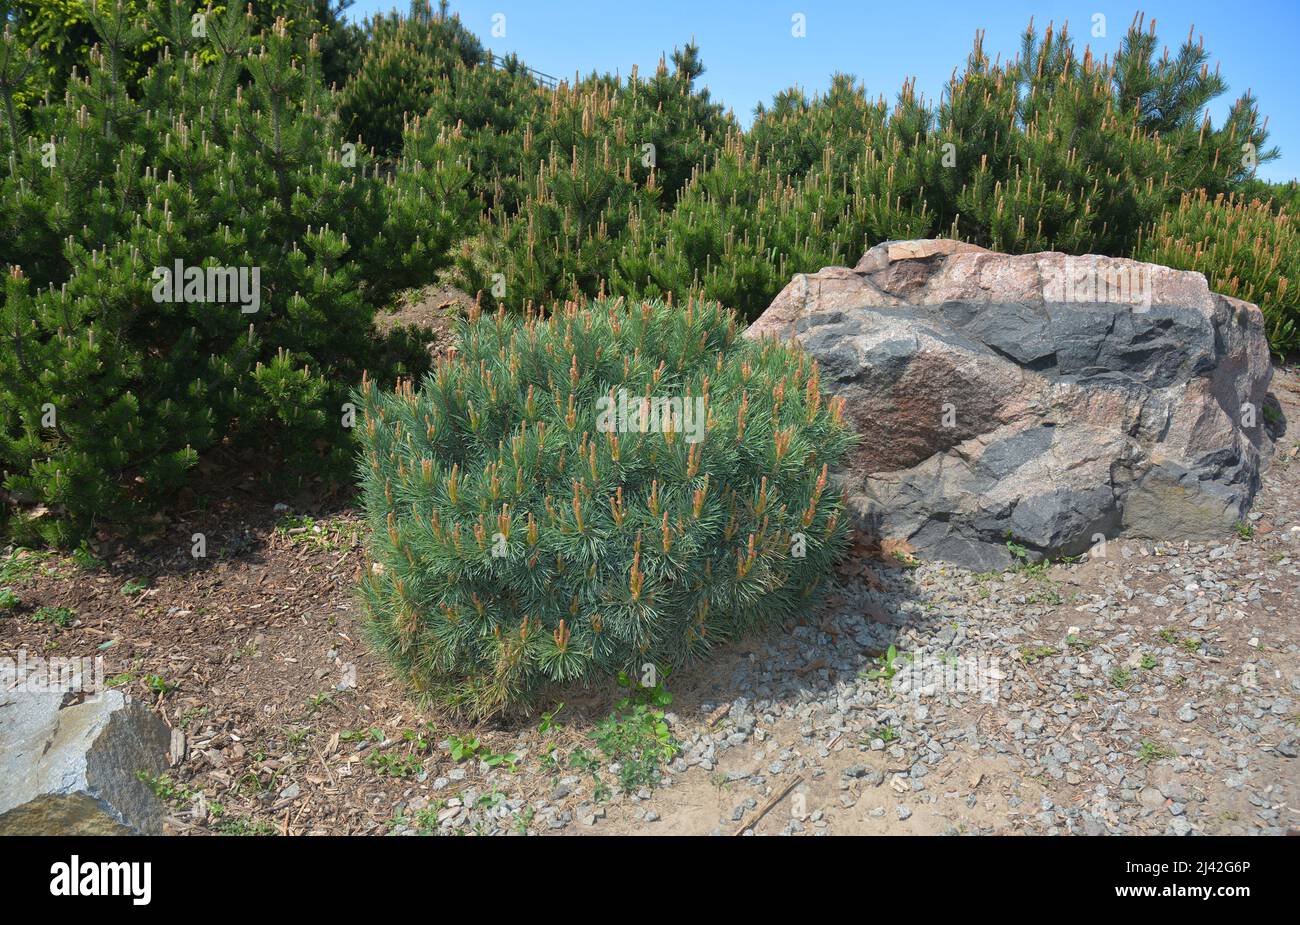 A mountain landscape design idea with a short pine, mugo pine shrub near a rock  surrounded with young mountain pine trees. Stock Photo